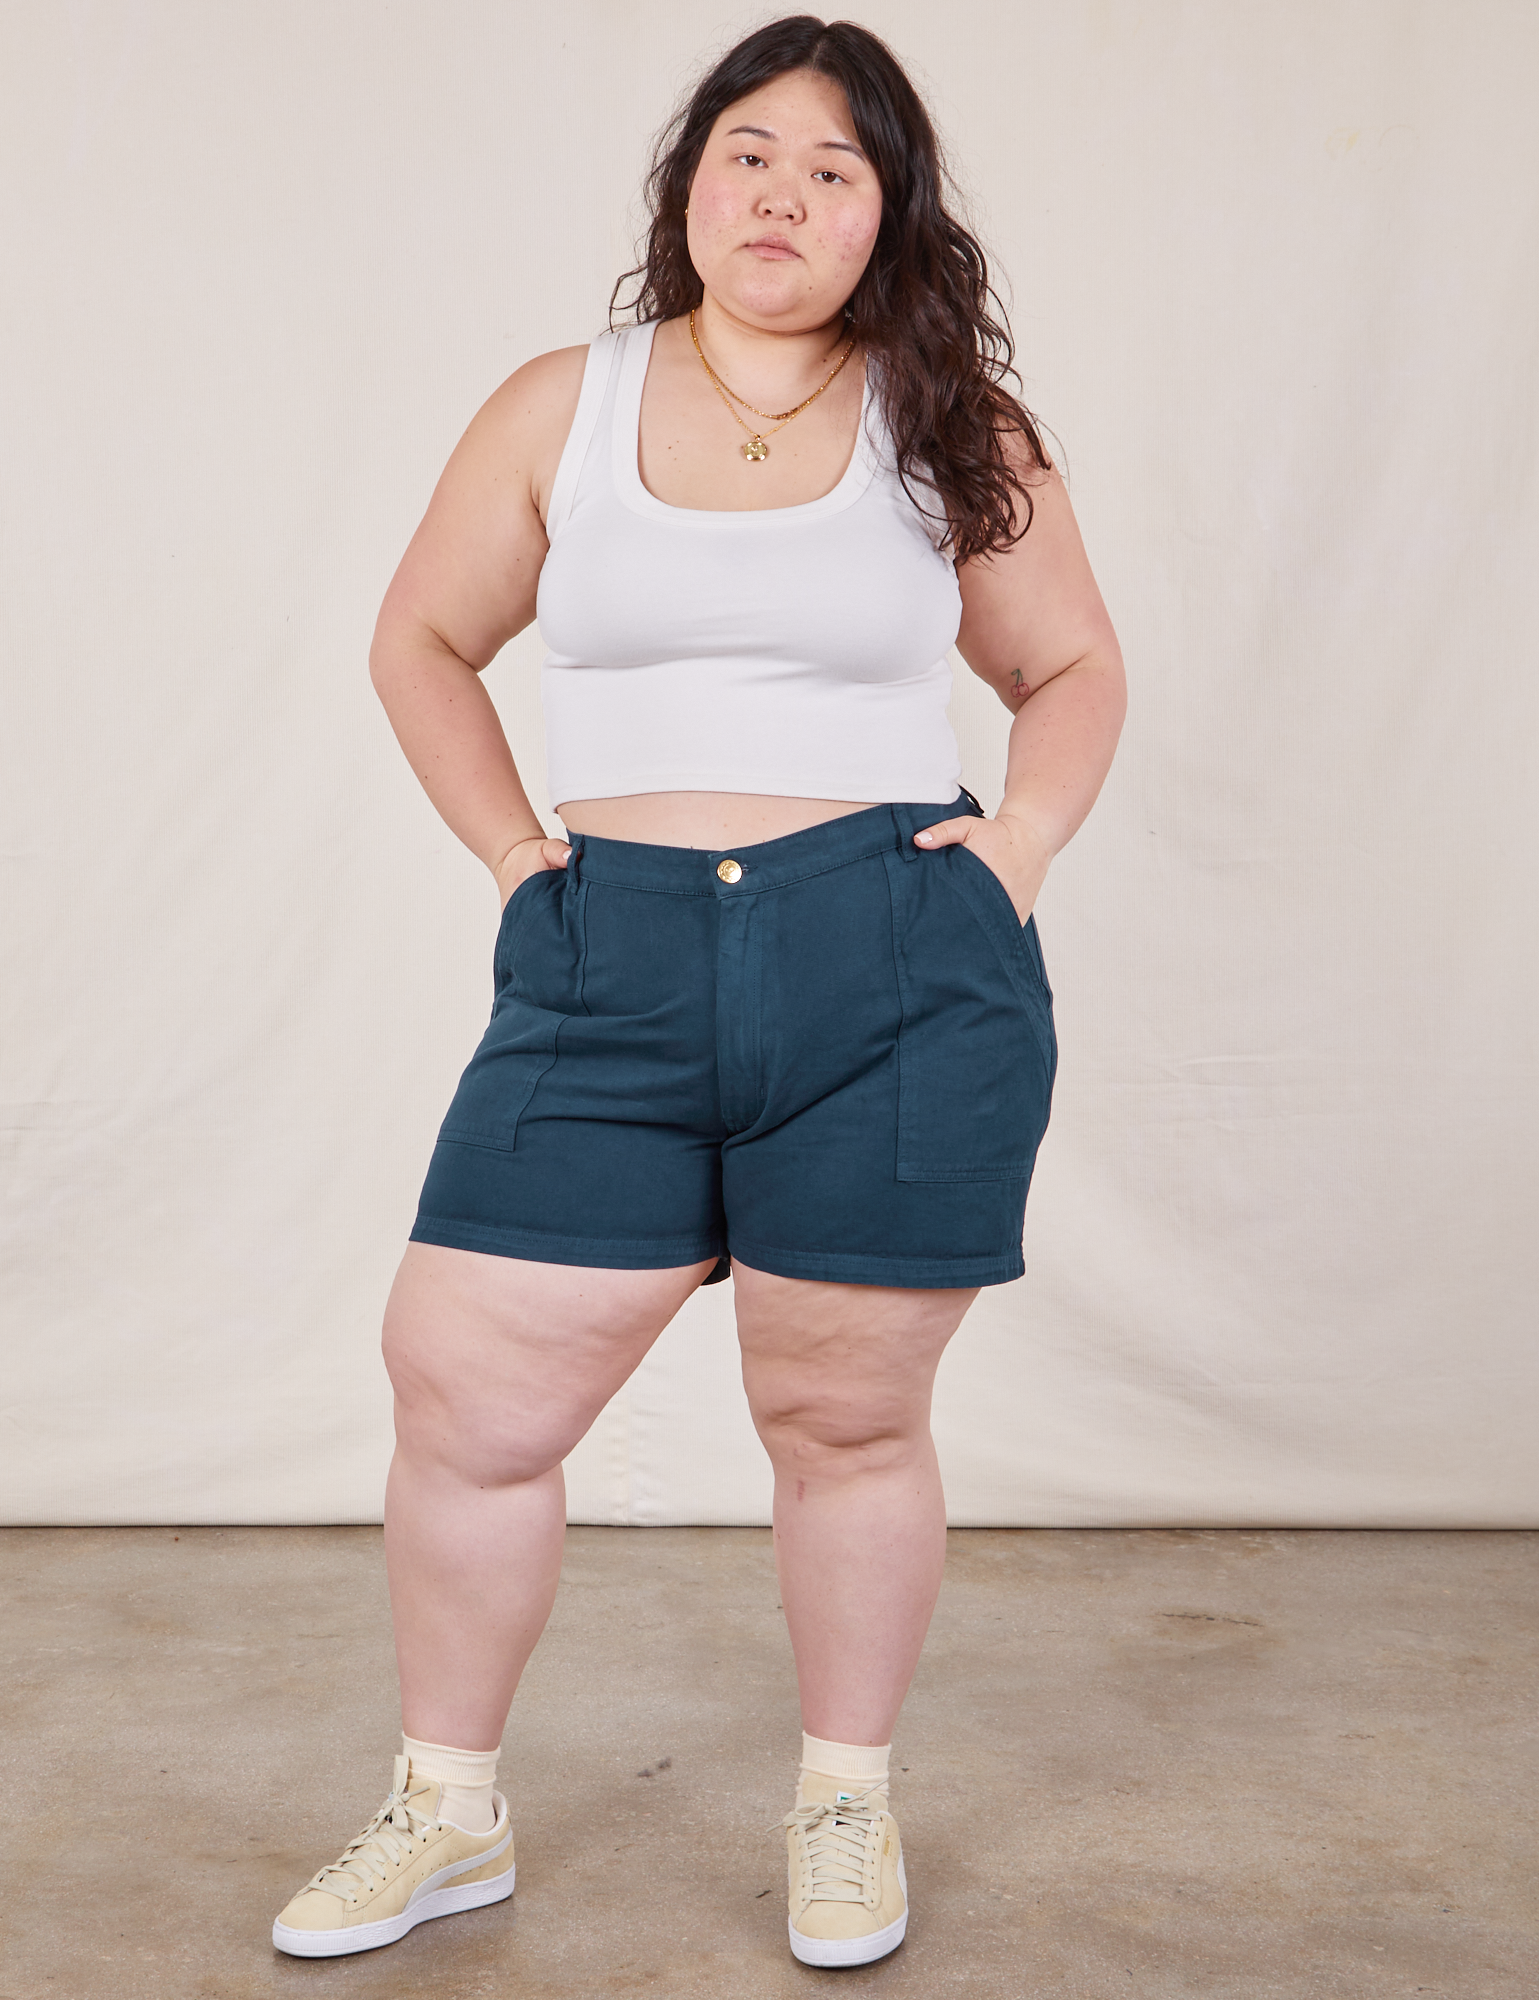 Ashley is 5’7” and wearing 1XL Classic Work Shorts in Lagoon paired with Cropped Tank Top in vintage tee off-white